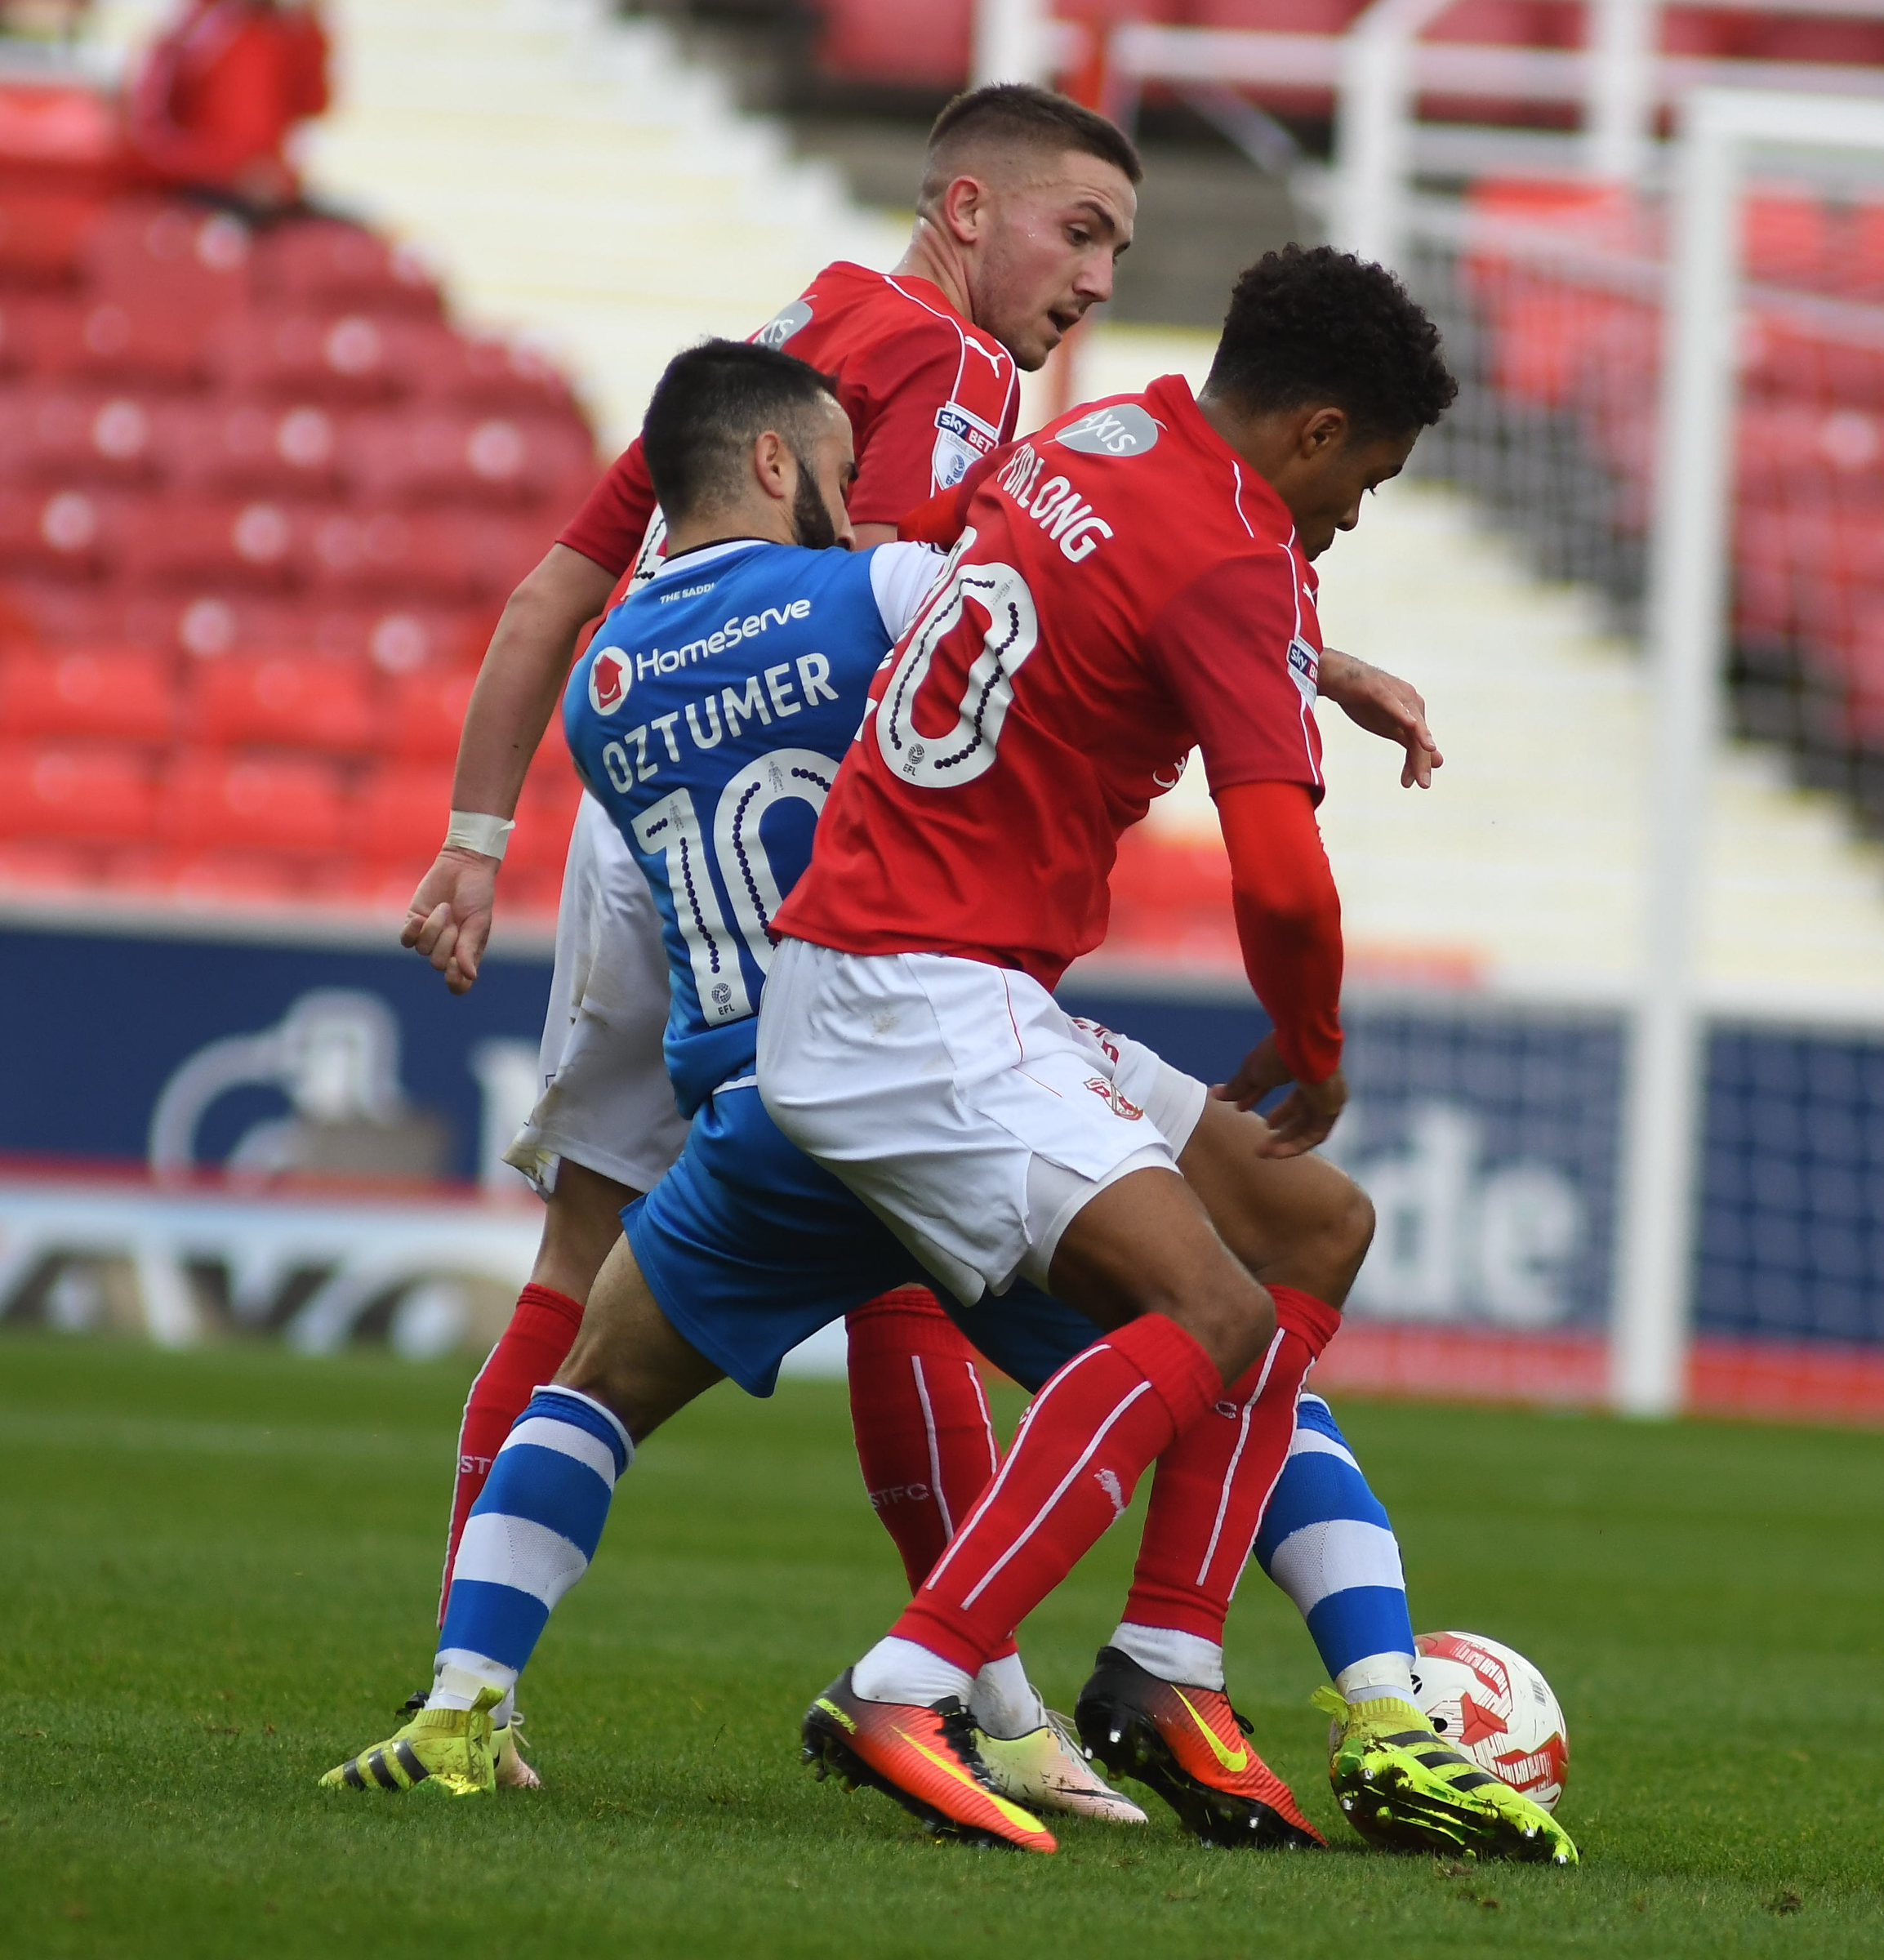 ON-THE-WHISTLE MATCH REPORT: Swindon 0-2 Walsall